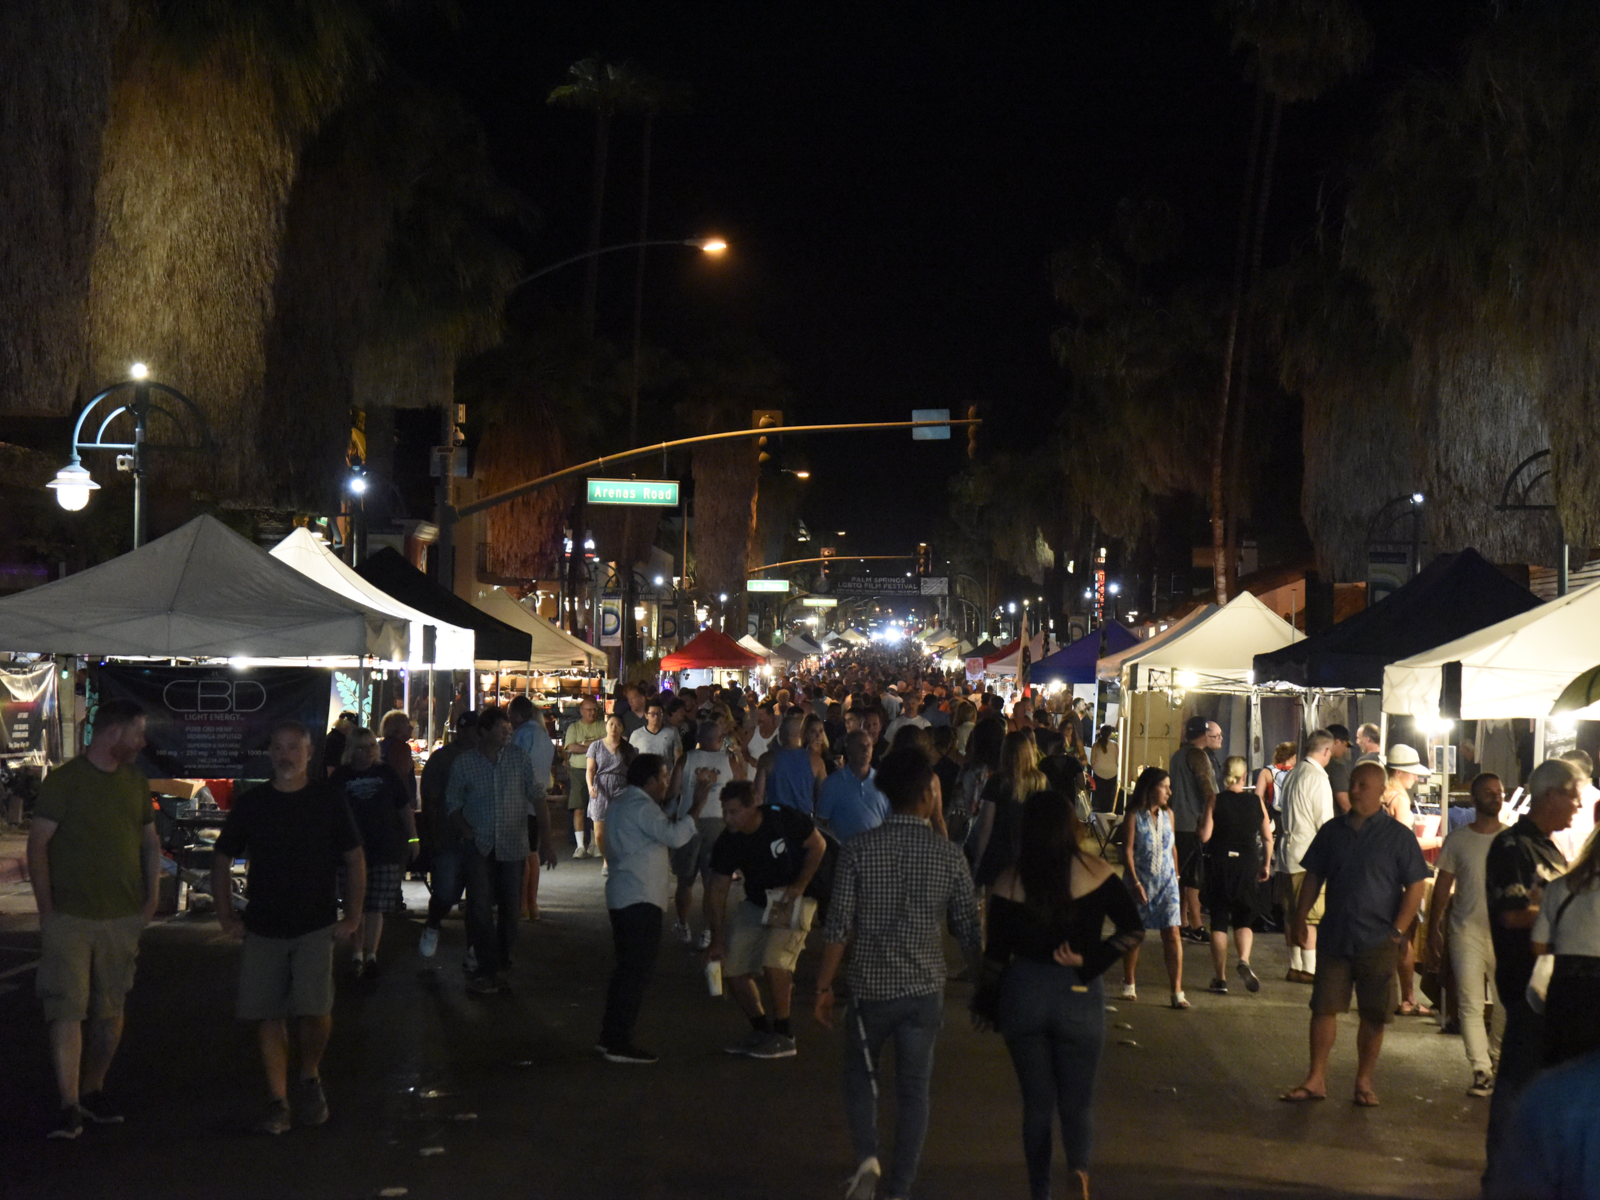 Busy night with a lot of people at lined up stalls in a Village Fest, one of the best things to do in Palm Springs